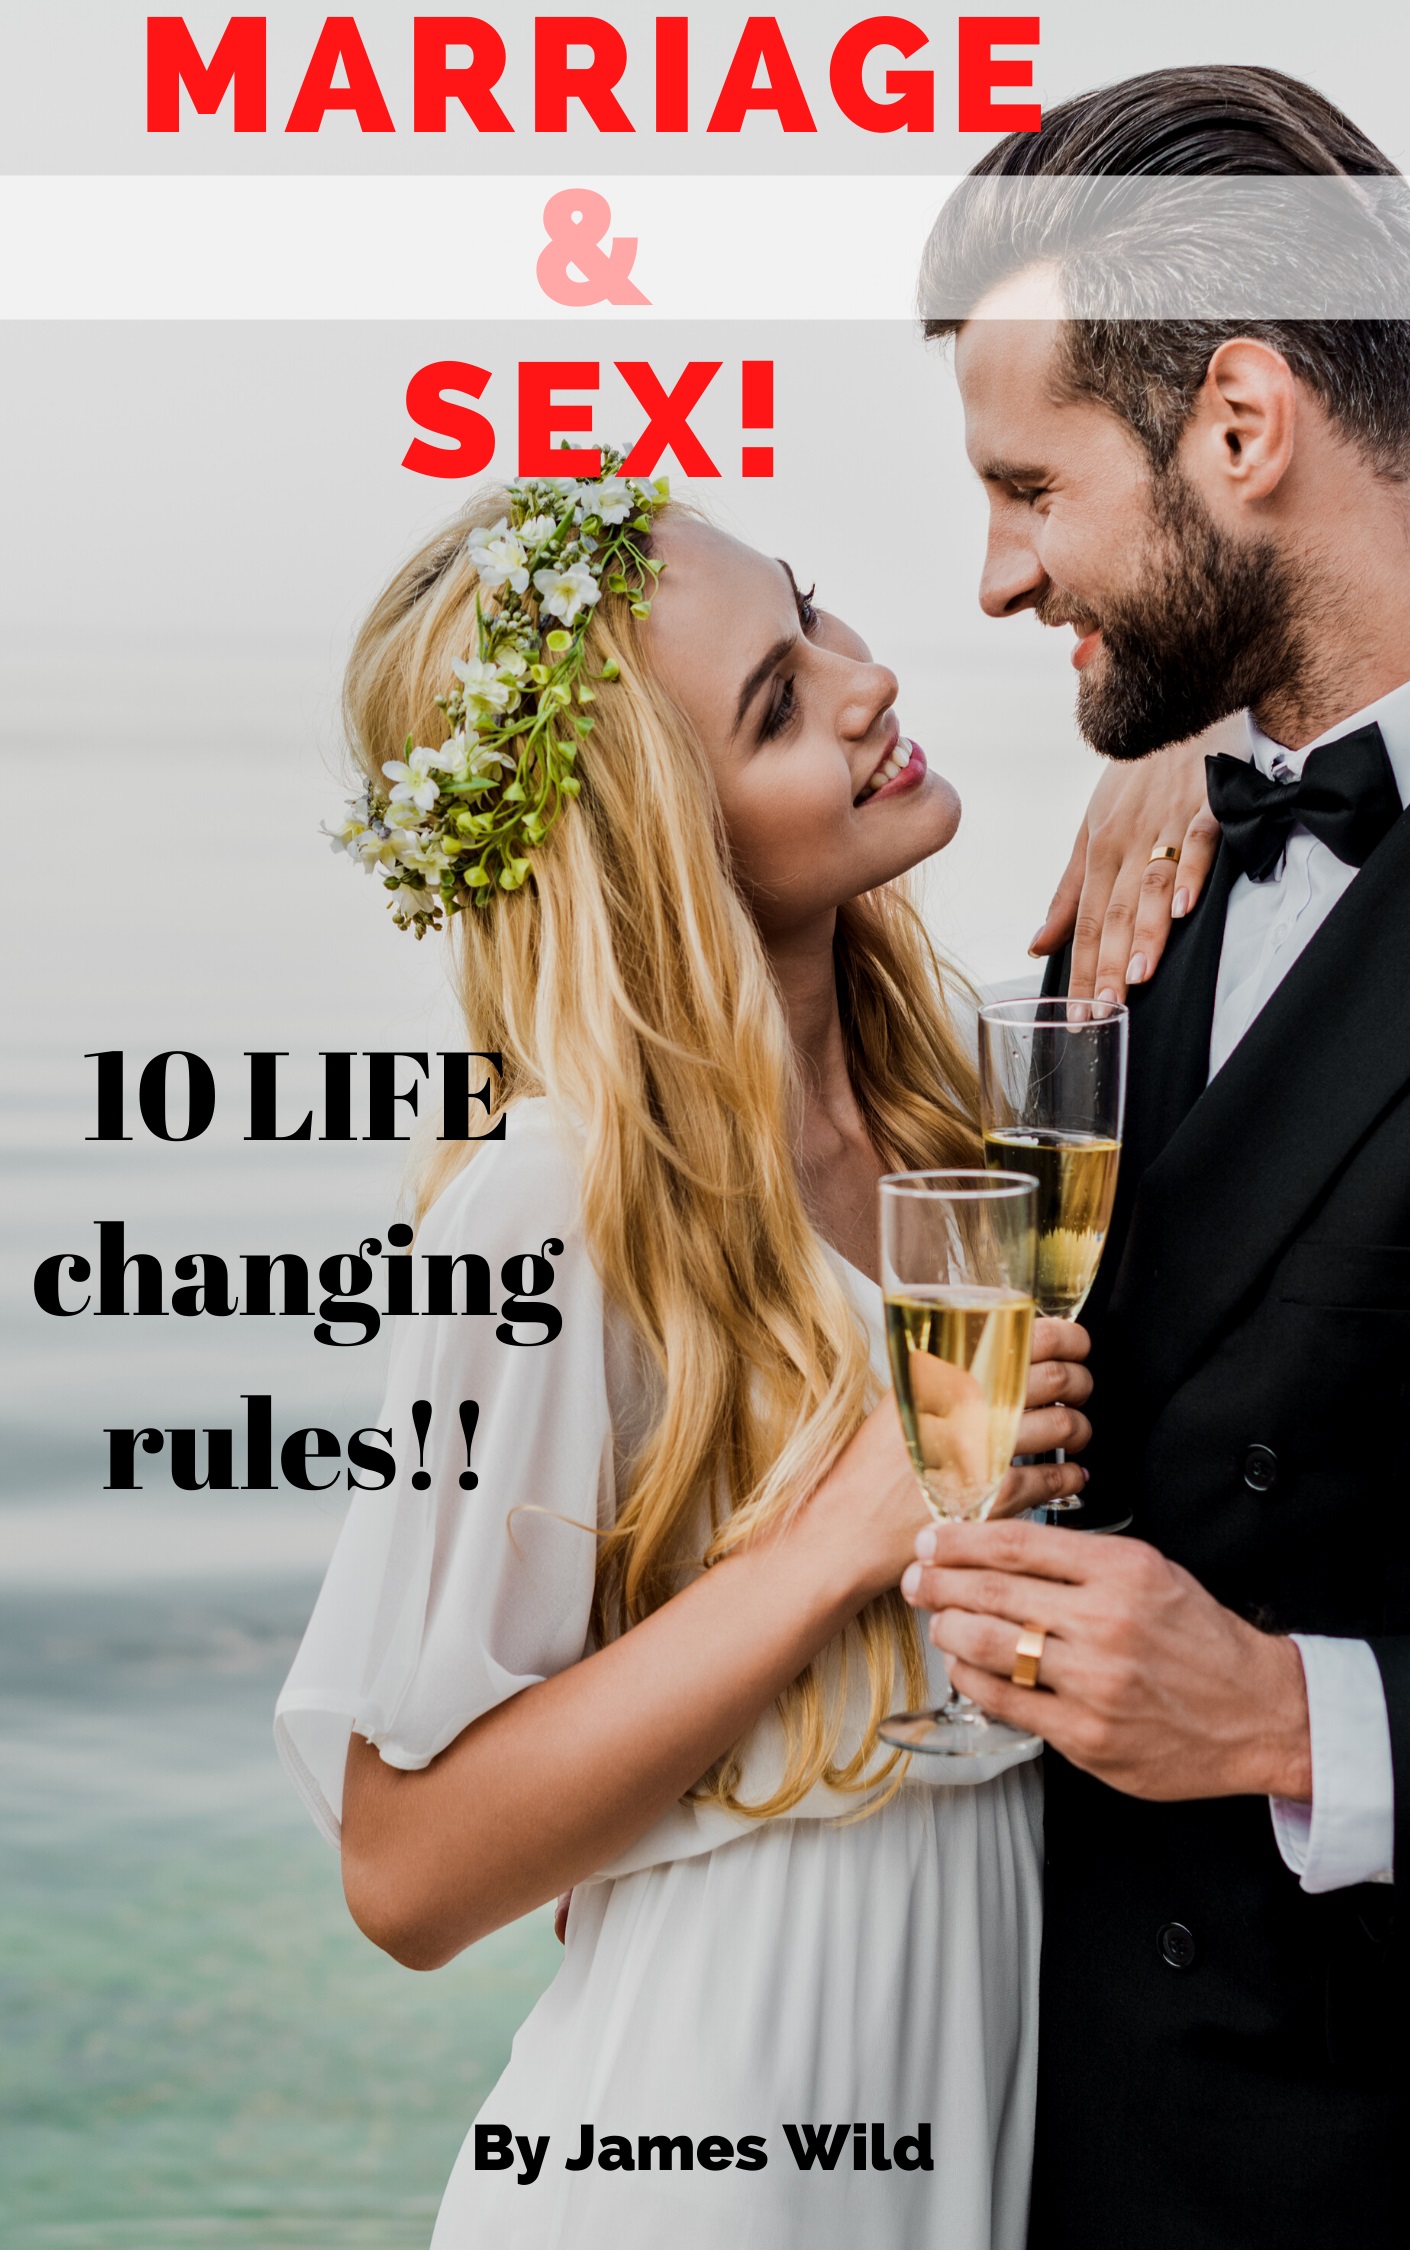 FREE: Sex & Marriage 10 life changing rules by James Wild